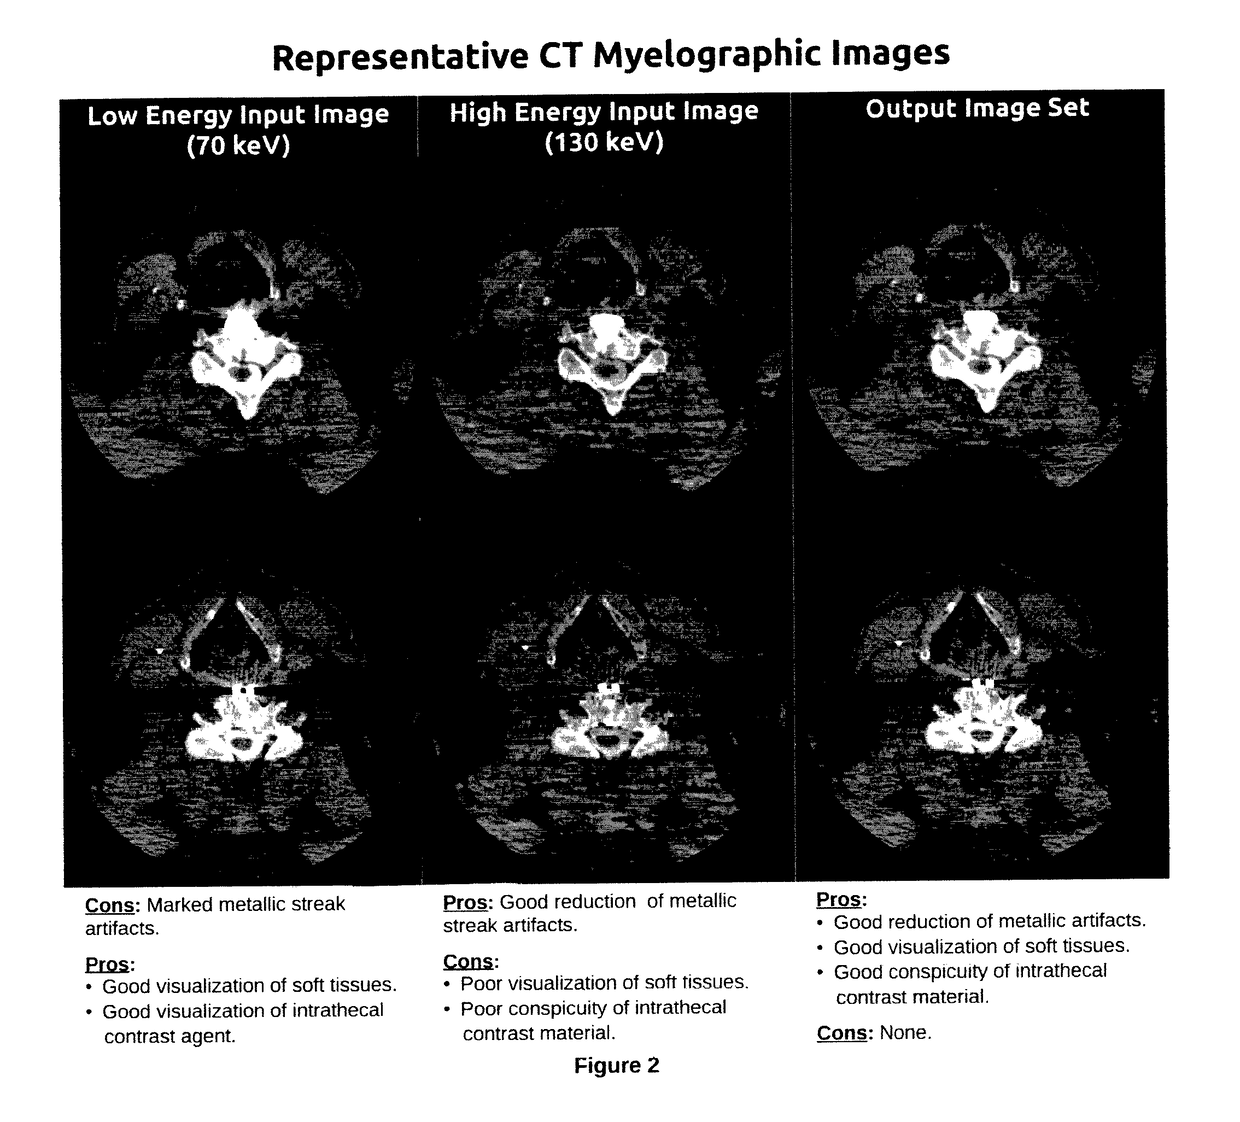 Method for Reduction of Artifacts and Preservation of Soft Tissue Contrast and Conspicuity of Iodinated Materials on Computed Tomography Images by means of Adaptive Fusion of Input Images Obtained from Dual-Energy CT Scans, and Use of differences in Voxel intensities between high and low-energy images in estimation of artifact magnitude